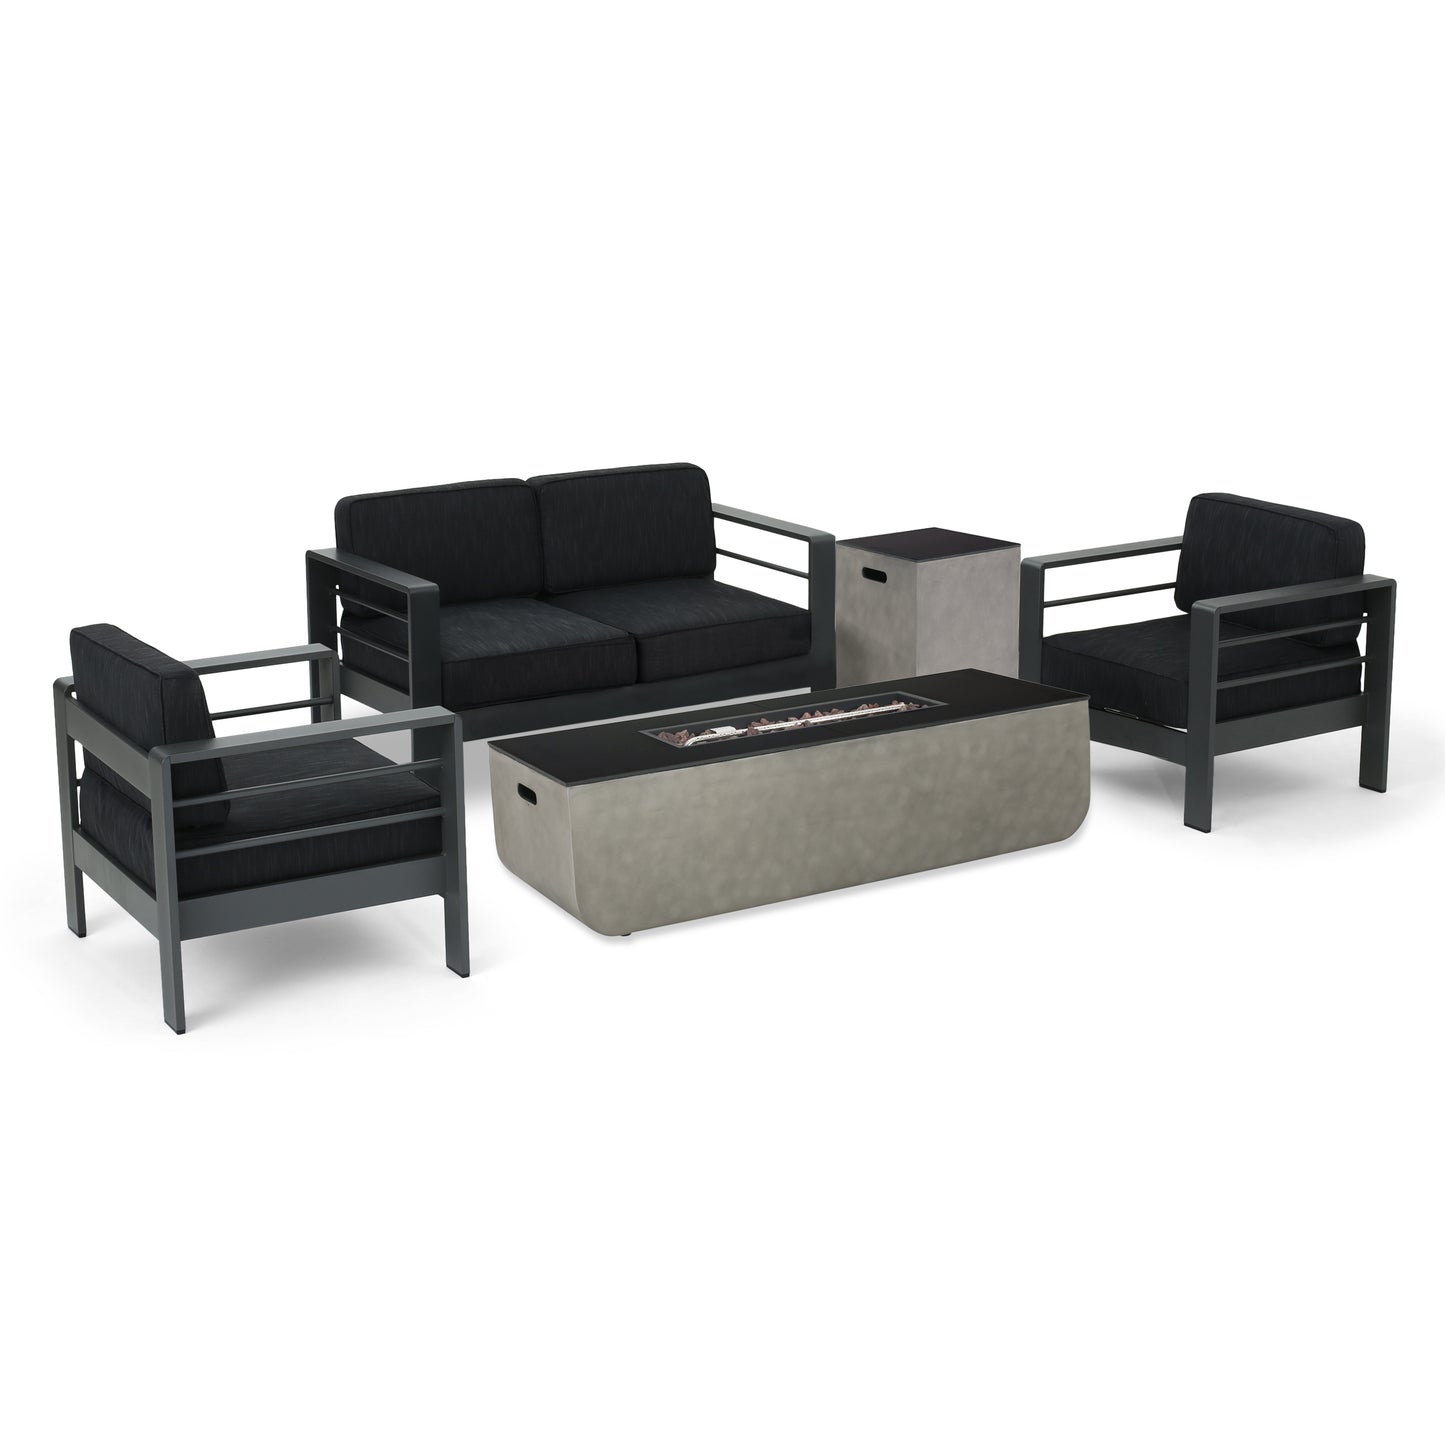 Cherie Outdoor 4 Seater Aluminum Chat Set with Fire Pit